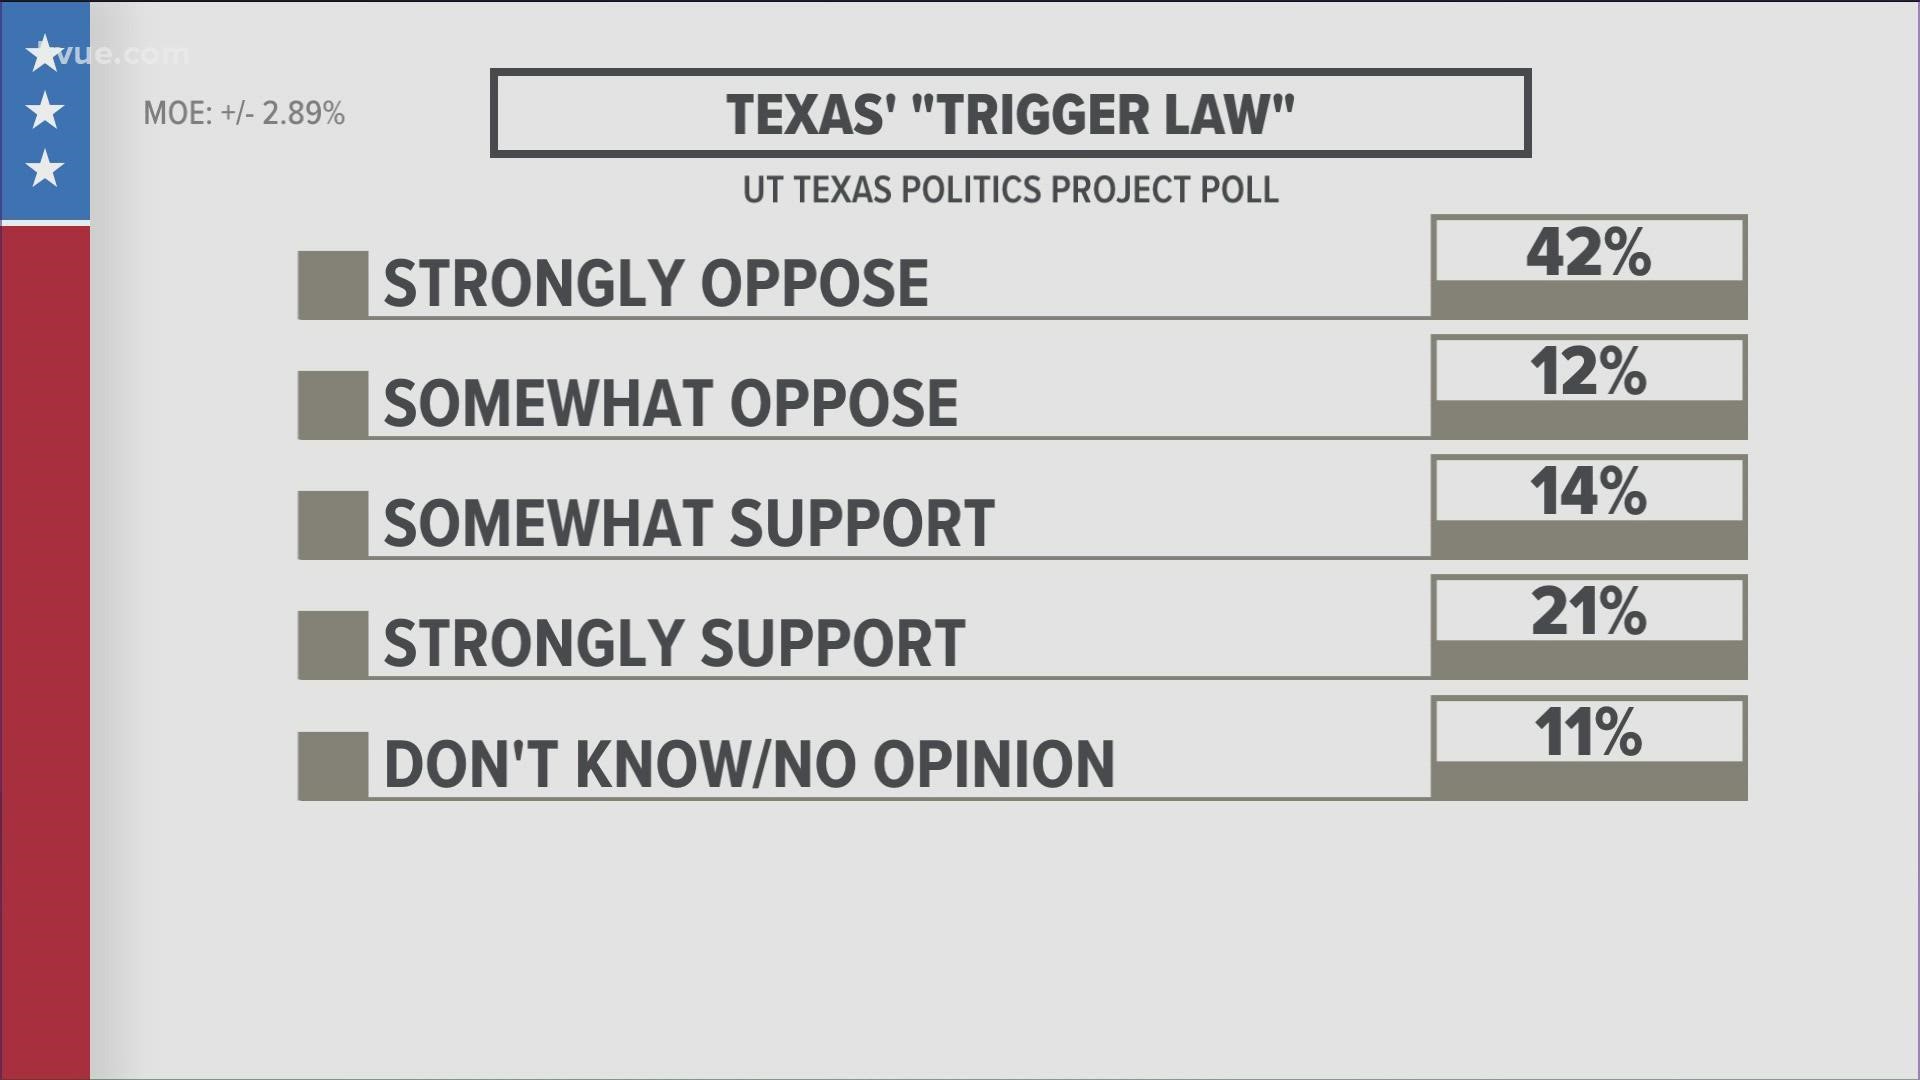 The poll shows a majority of Texans oppose making abortion illegal.